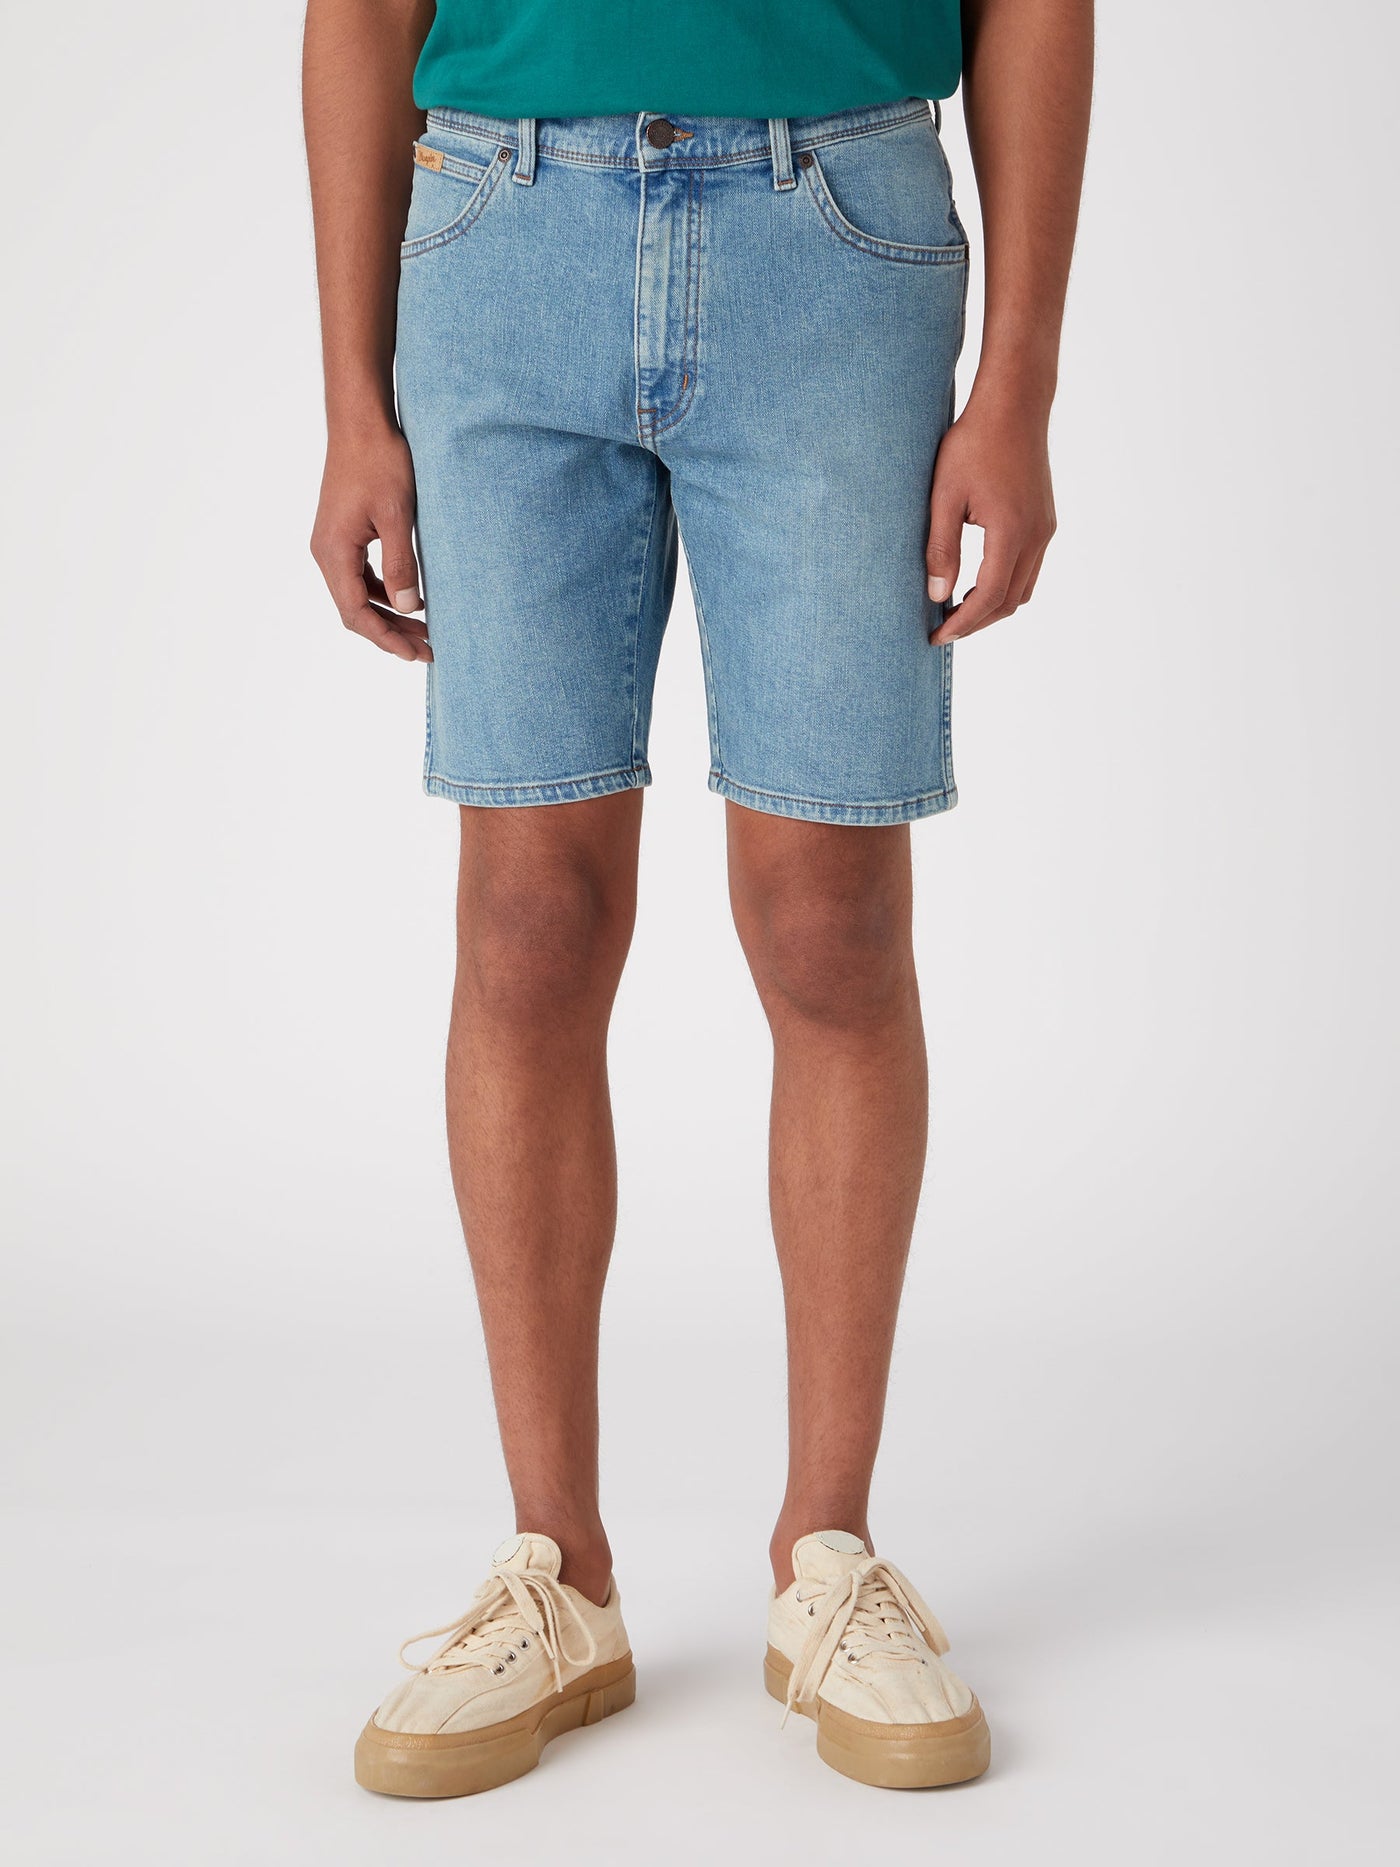 Texas Shorts in Ride Or Dye Jeansshorts Wrangler   